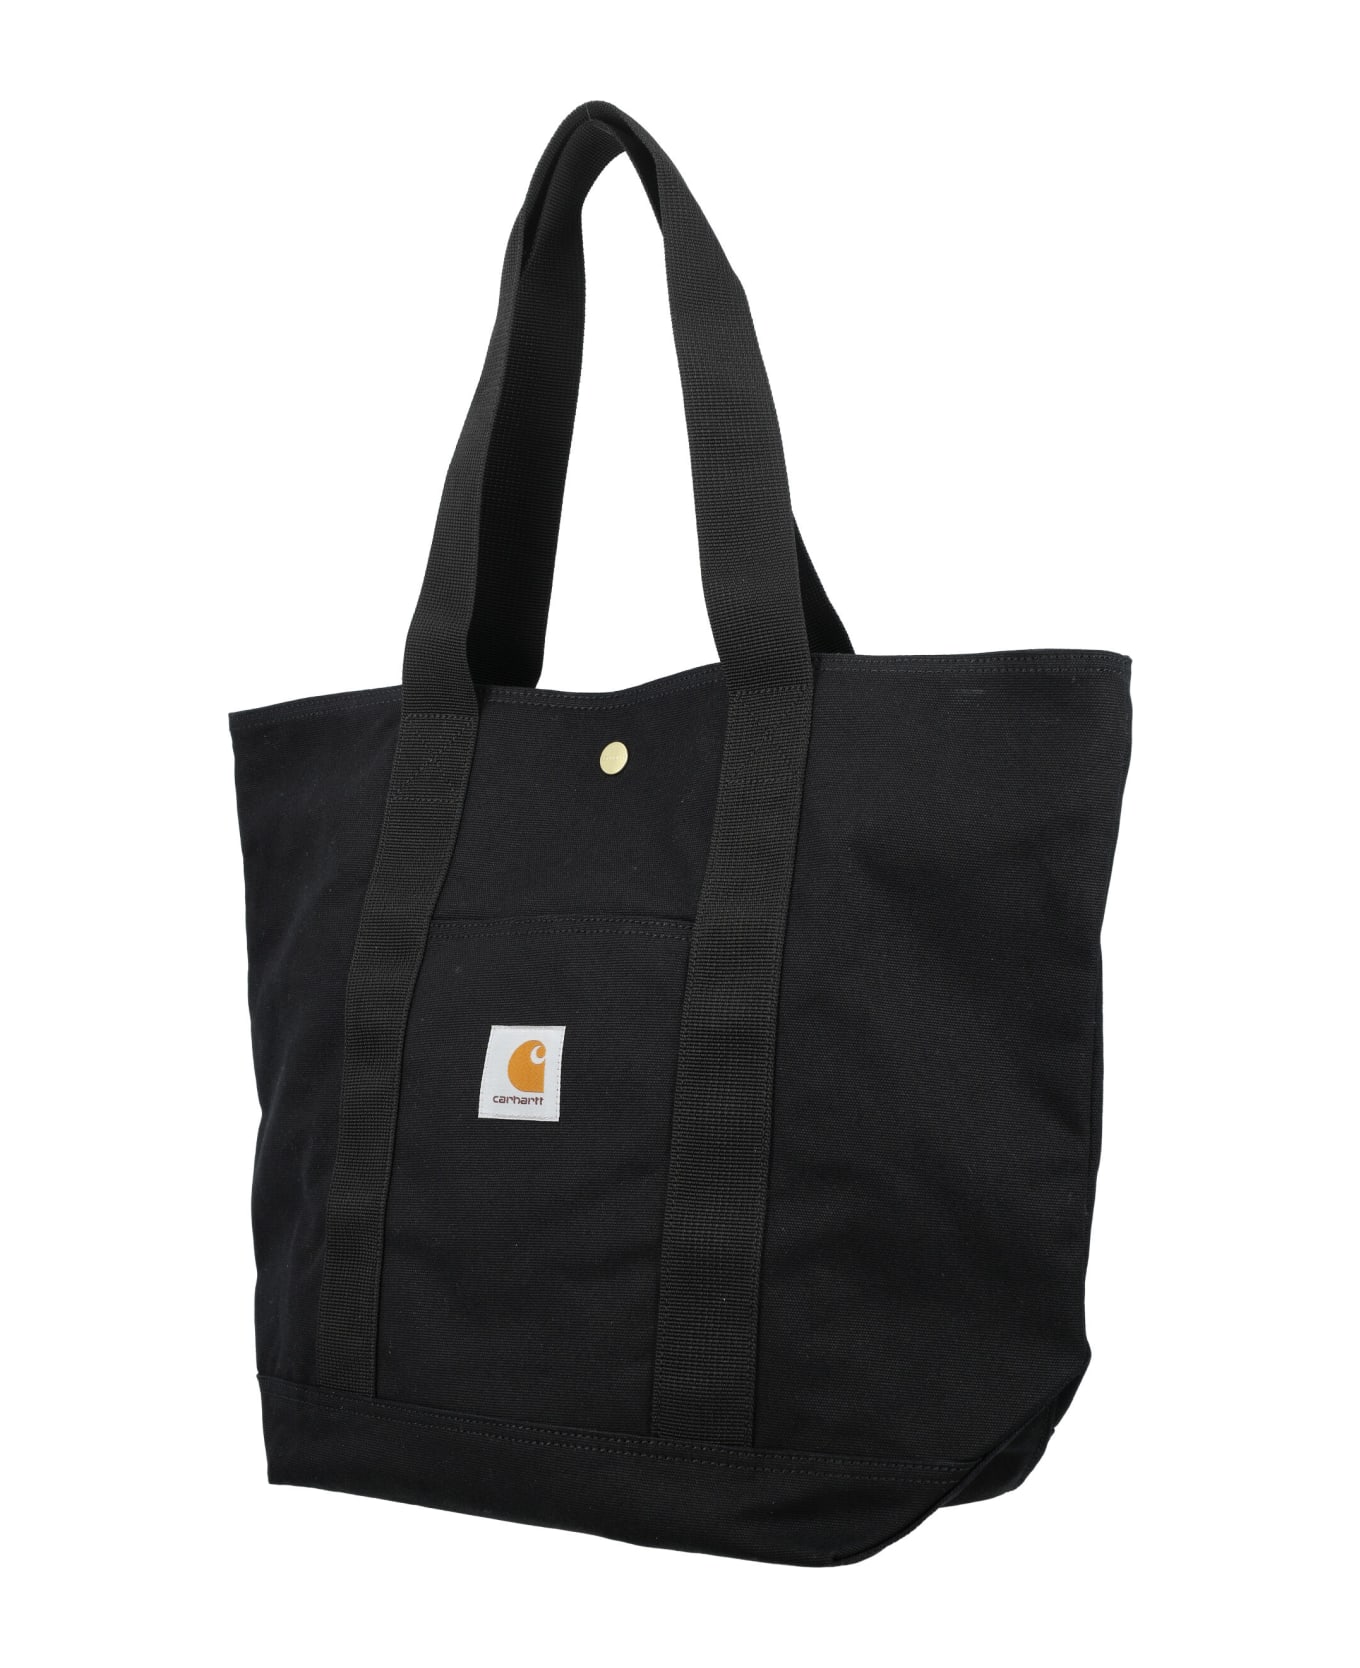 Carhartt Canvas Tote Bag - BLACK RINSED トートバッグ